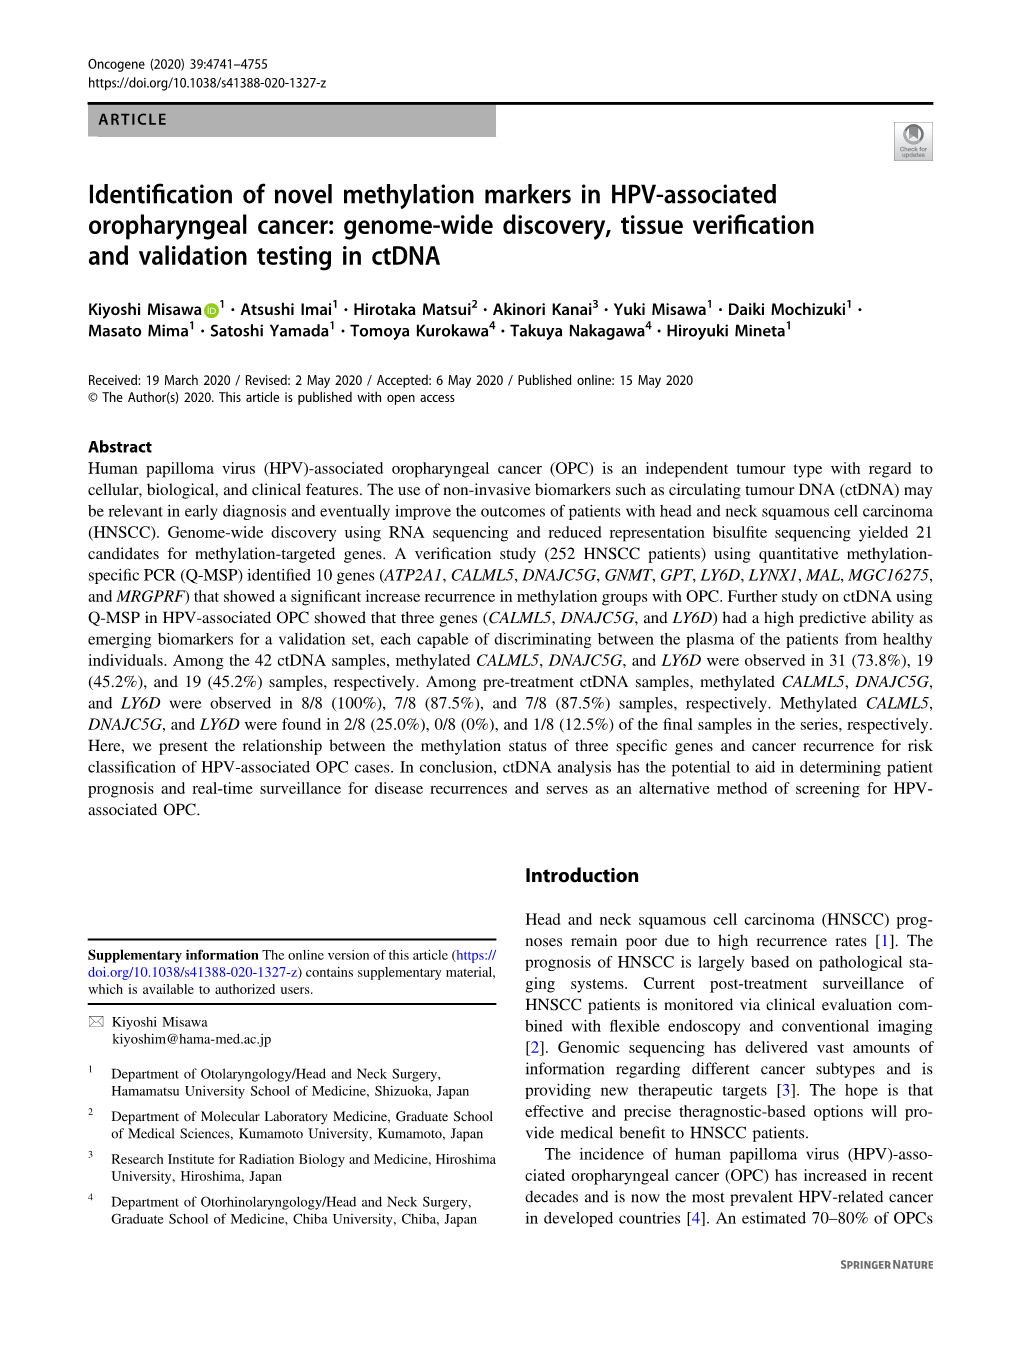 Identification of Novel Methylation Markers in HPV-Associated